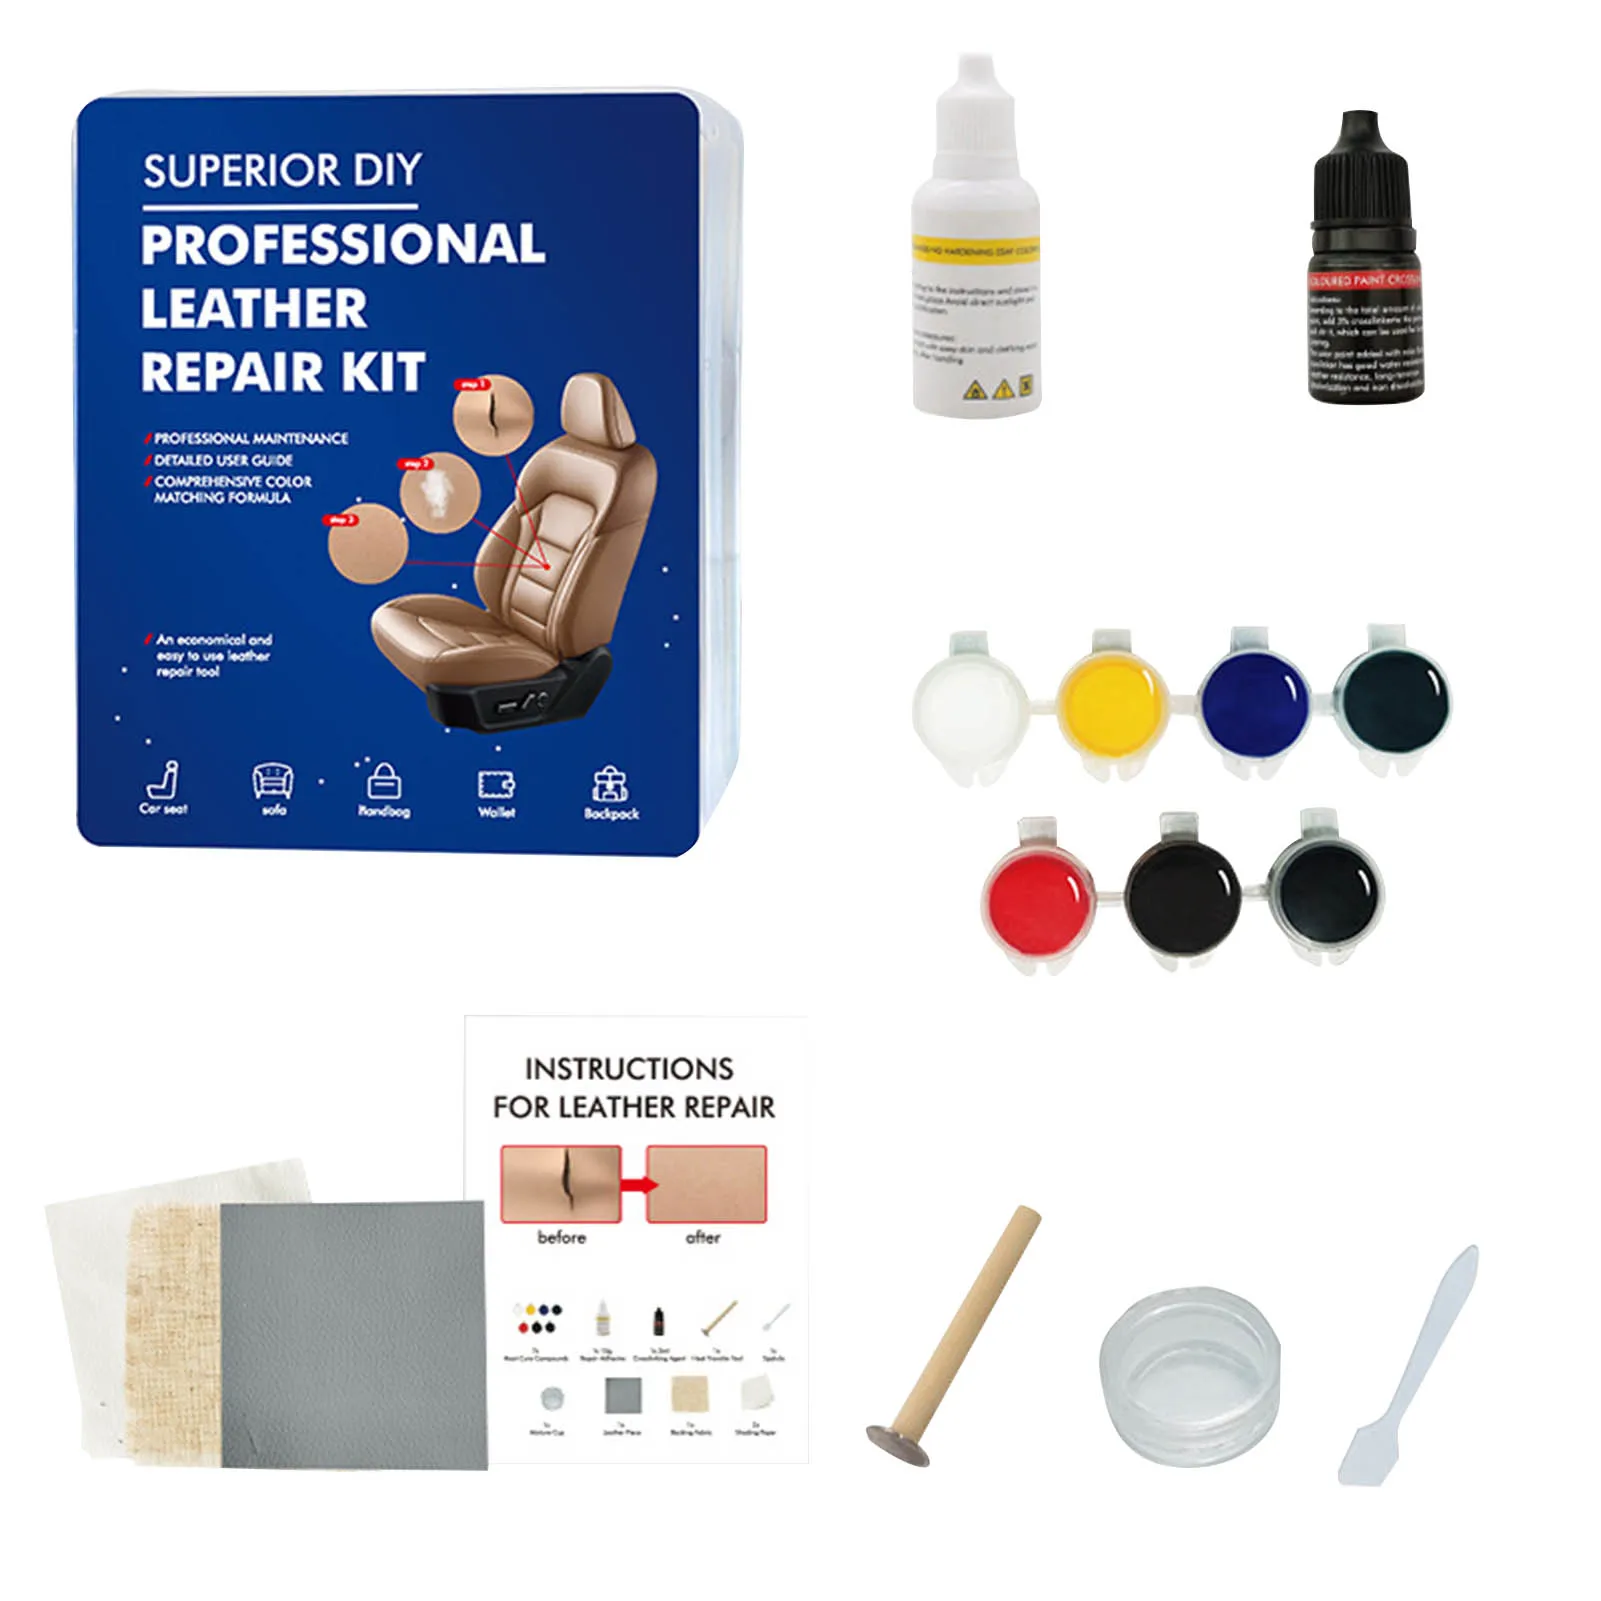 Visbella DIY Leather and Vinyl Repair Kit, Do It Yourself Tool Fix Holes,  Rips, Upholstery Jacket, Leather Car Seat, Automotive and Household Adhesive